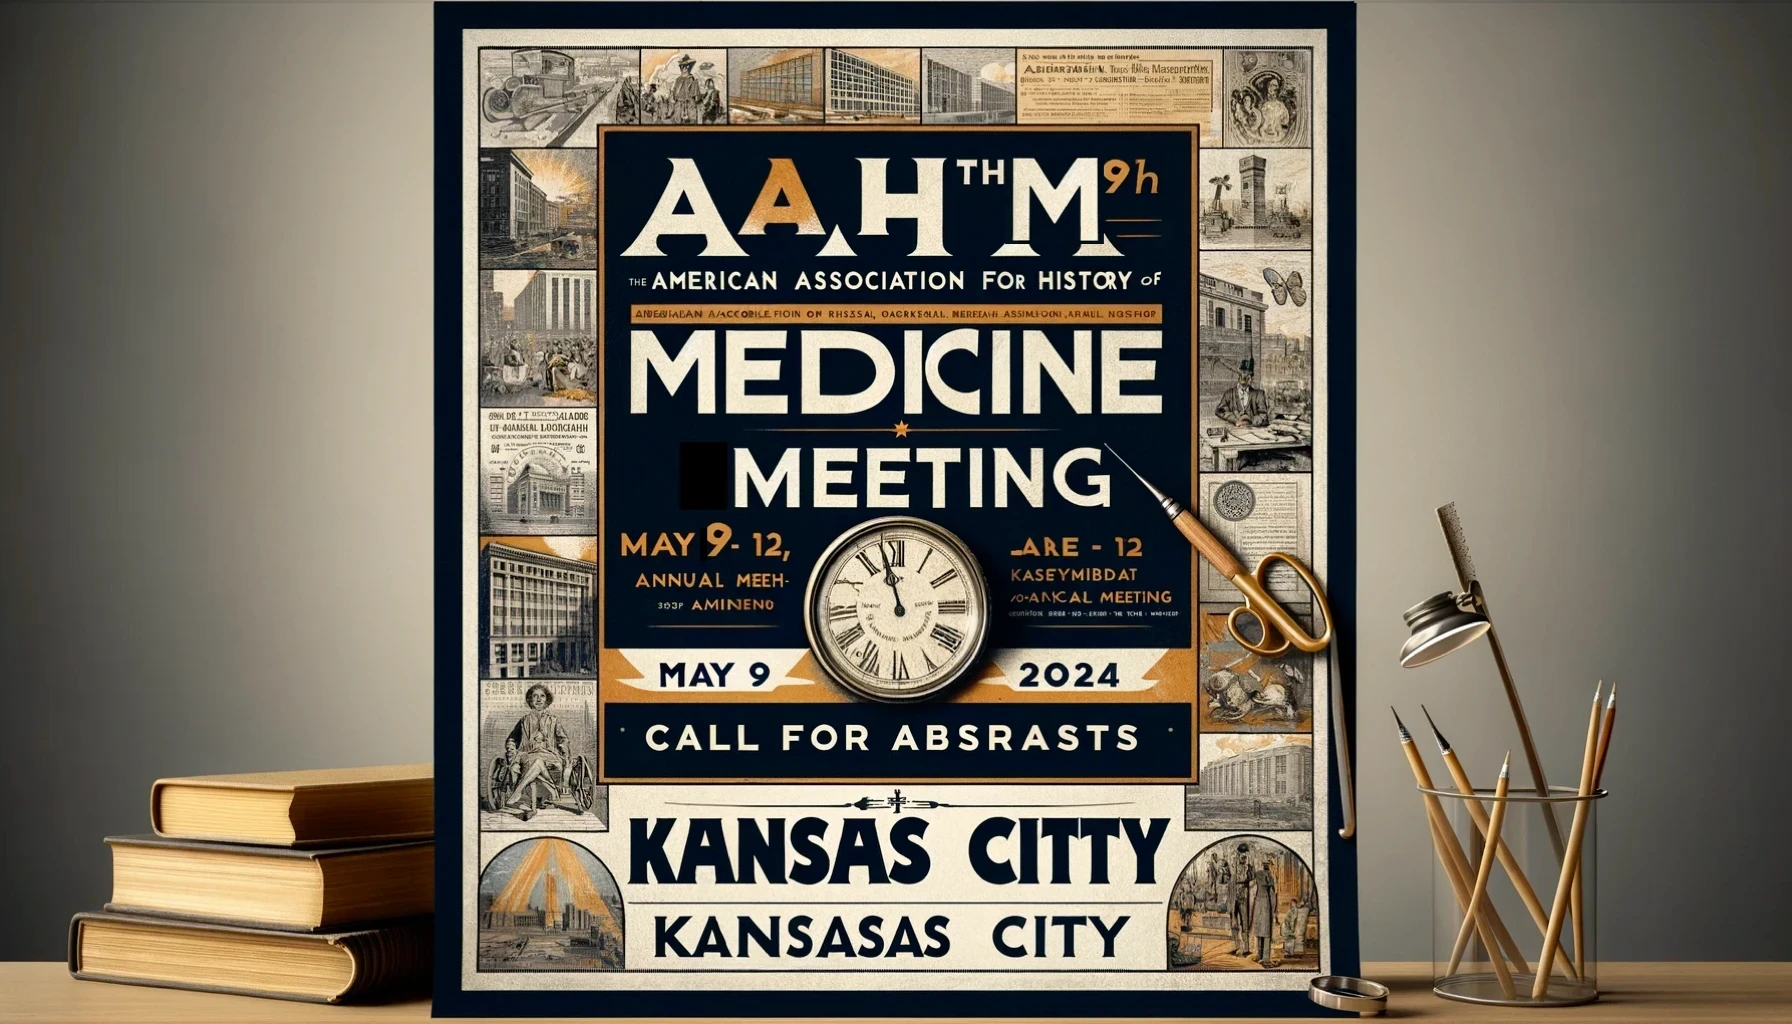 American Association for the History of Medicine holds 97th annual meeting on May 9-12 2024 in Kansas